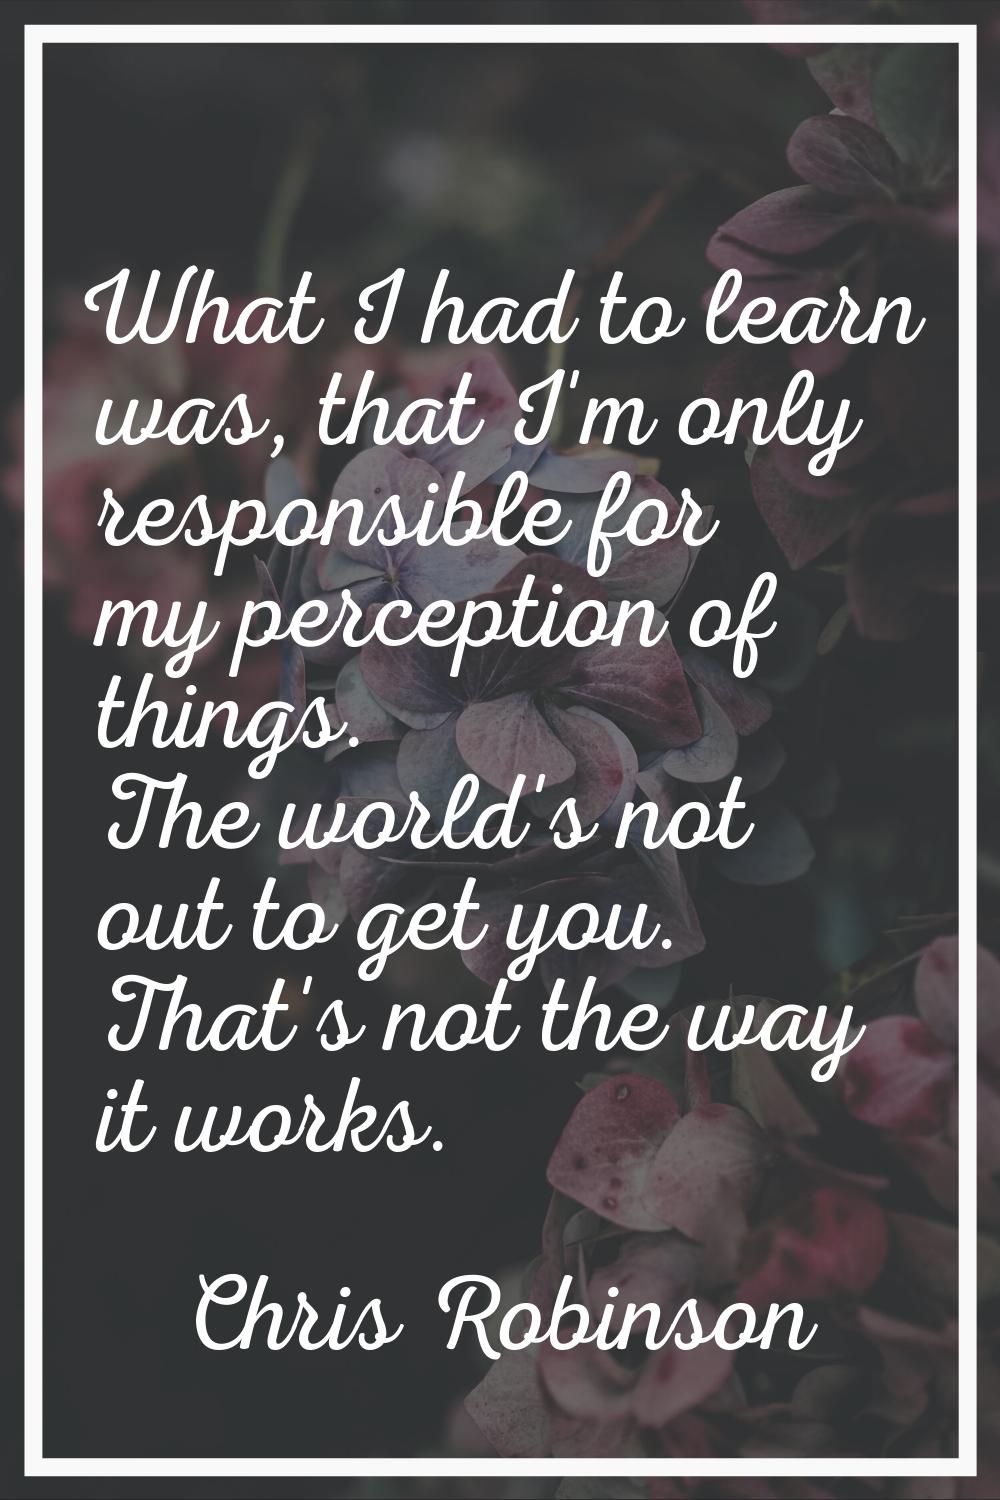 What I had to learn was, that I'm only responsible for my perception of things. The world's not out